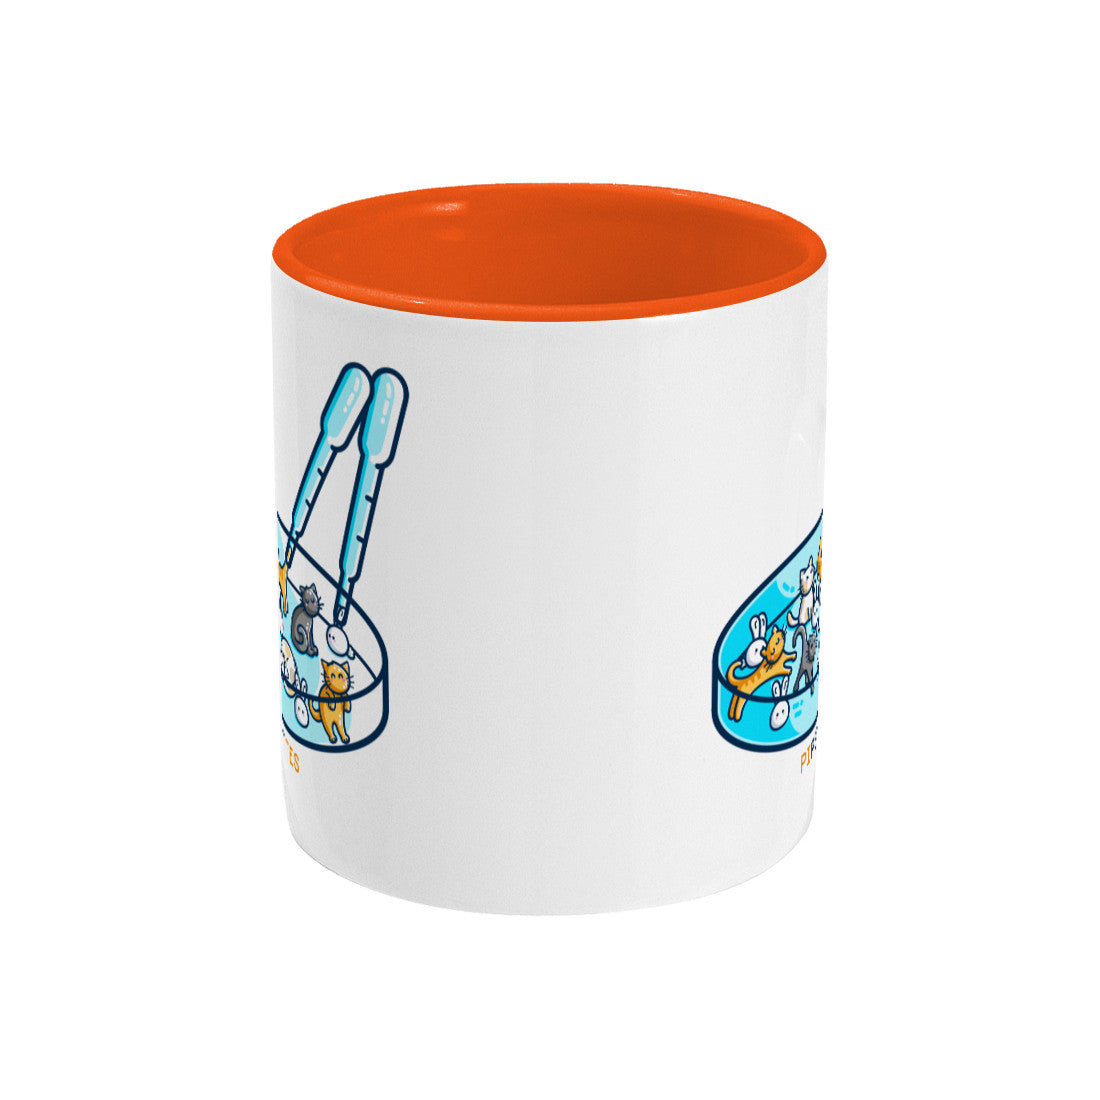 A white mug with an orange coloured handle and inside, side view with handle hidden behind and only portions of the design printed on the front and back of the mug visible.